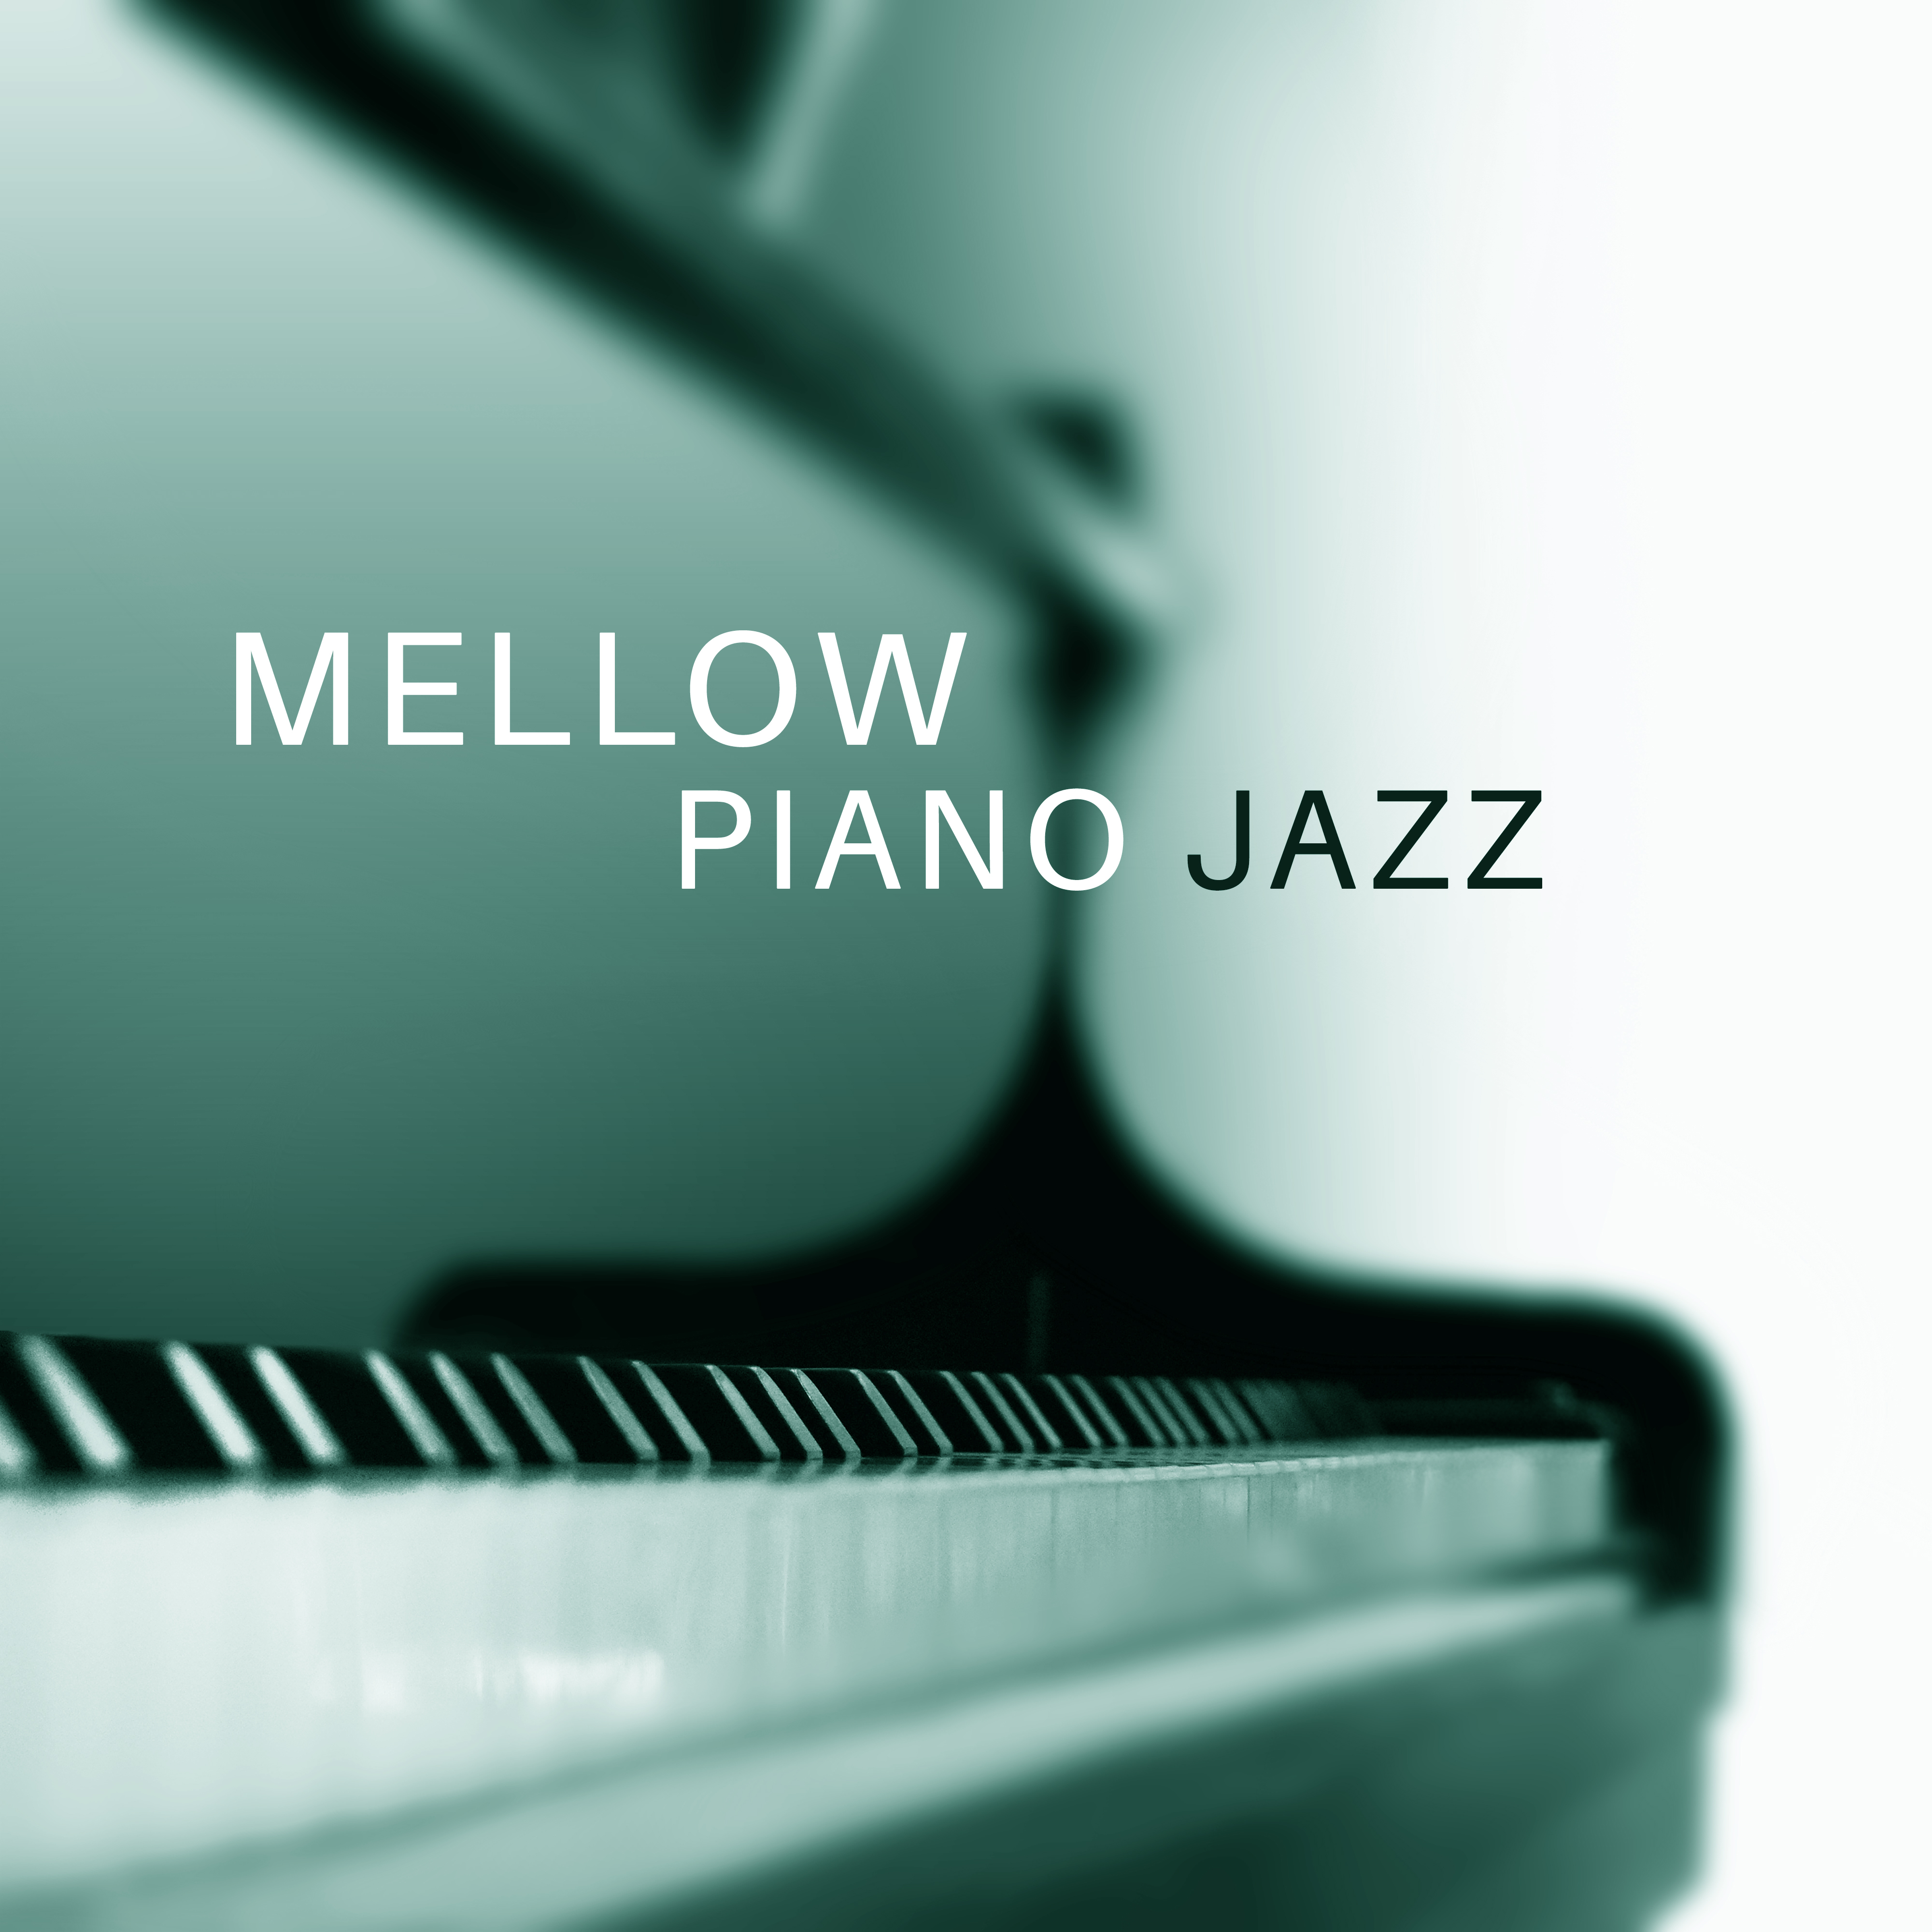 Mellow Piano Jazz  Calm Jazz Piano Songs, Chilled Evening with Jazz, Smooth Music, Moonlight Sounds